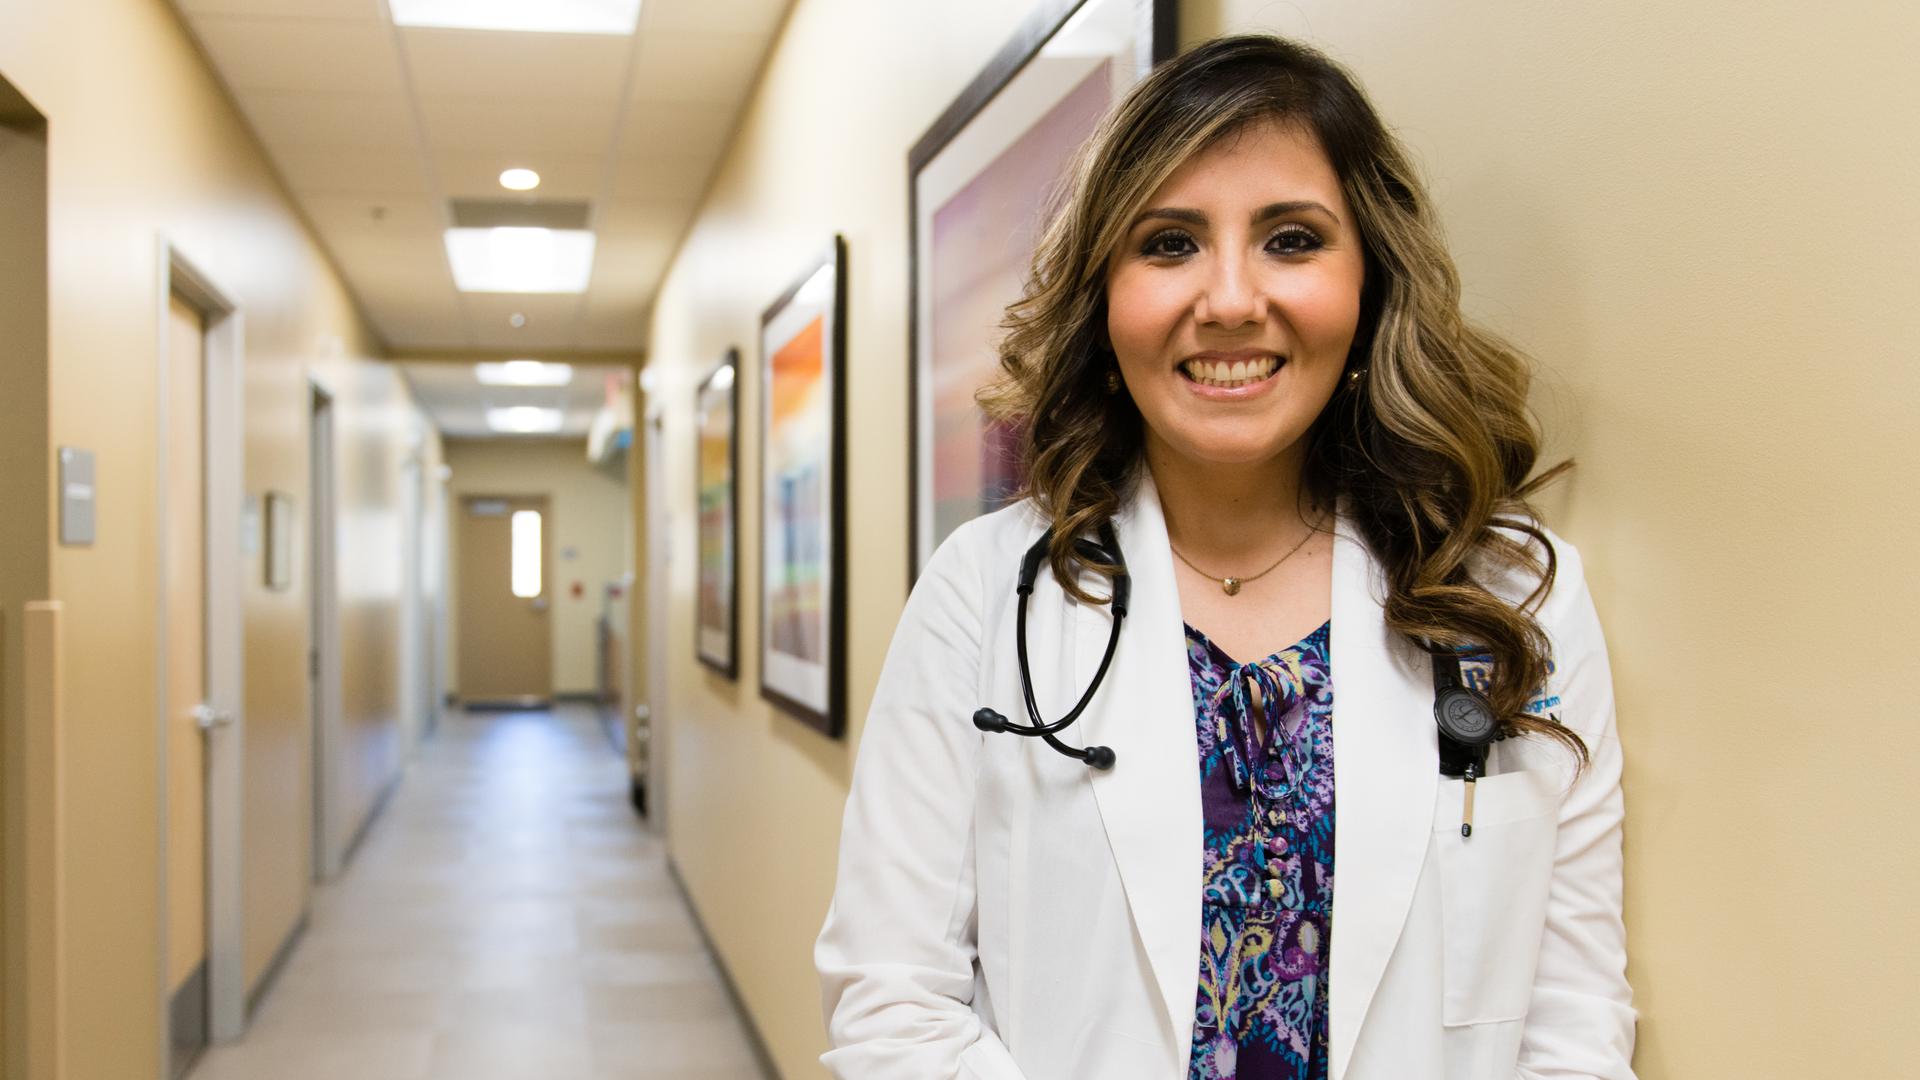 Dr. Olga Maeve is finishing up her medical residency at Clinica Sierra Vista in Bakersfield, California.